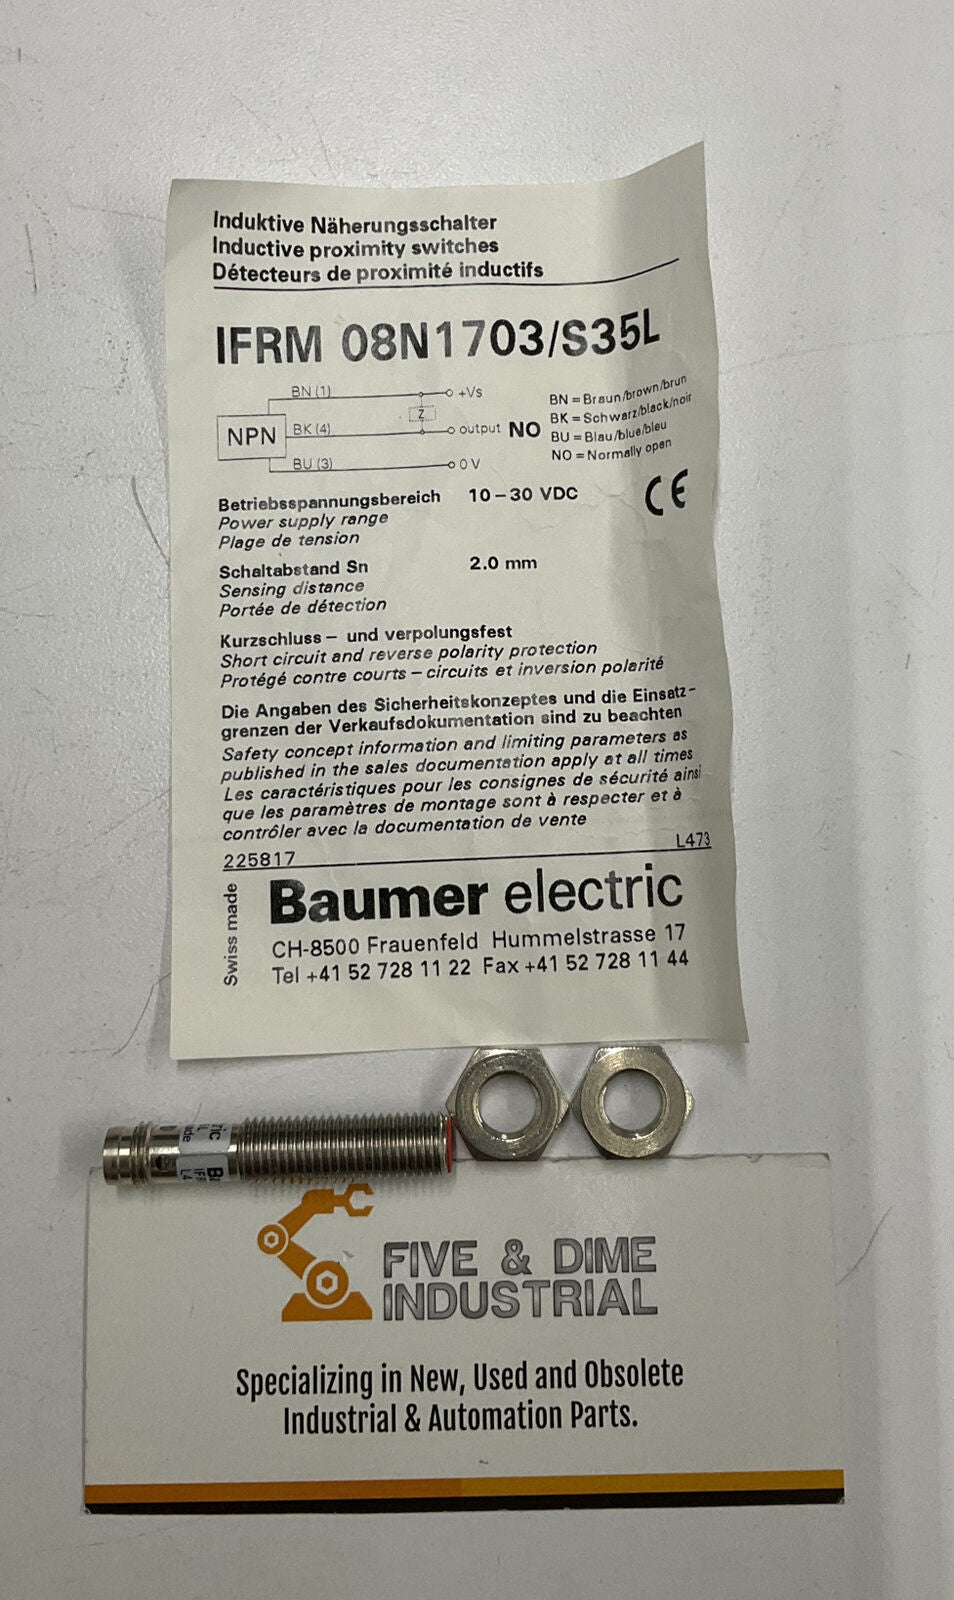 Baumer Electric IFRM-08N1703 / S35L Inductive Proximity Switch / Sensor (BL192)